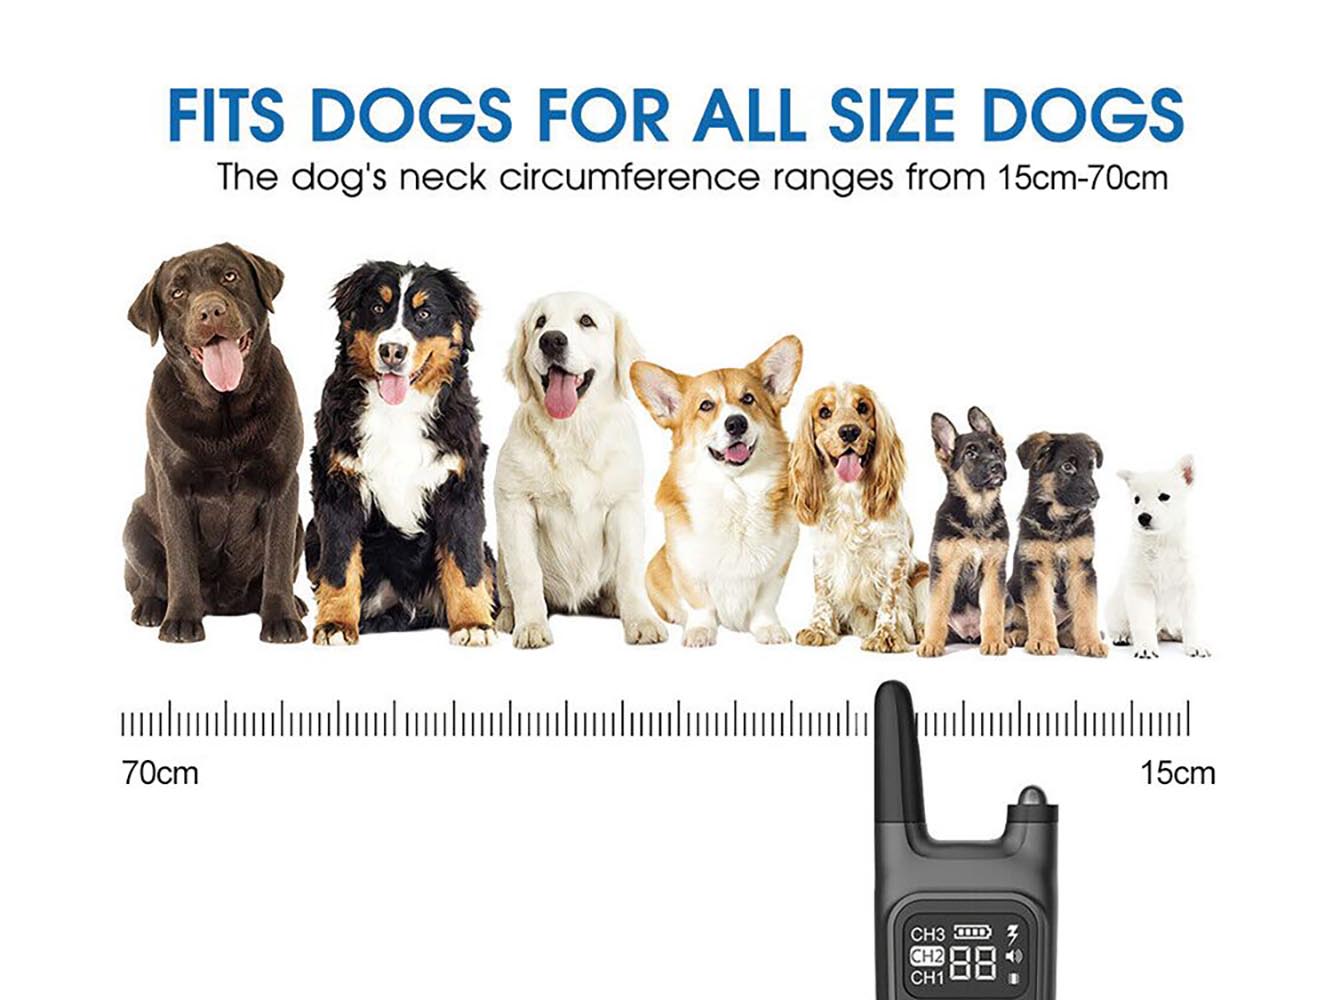 Rechargeable Electric Pet Dog Training Collar for 2 Dogs - The Shopsite